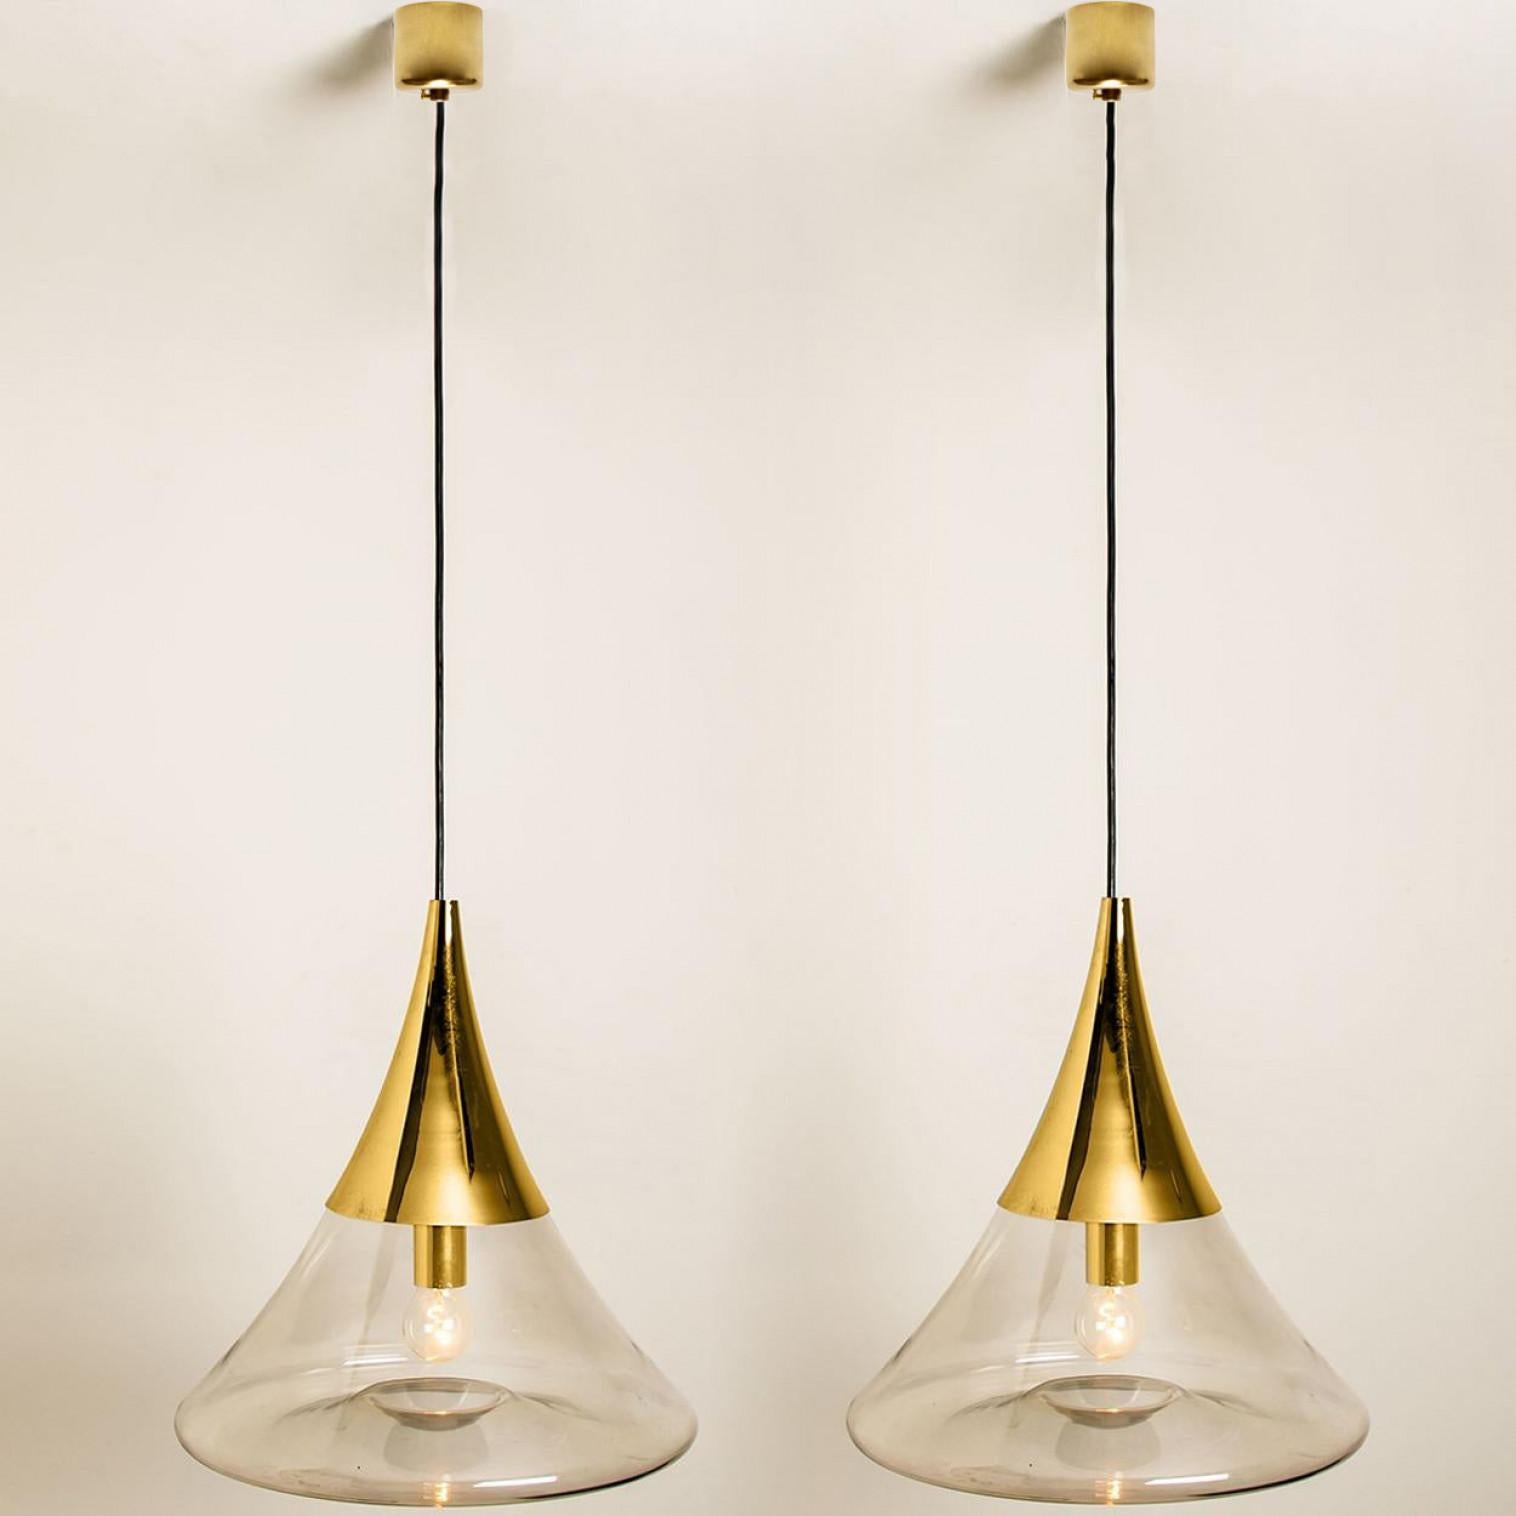 Pair of Cone shaped minimalistic light fixtures by Limburg Glashutte, 1970. Clean lines and timeless design.

Great quality and in perfect condition. Cleaned, re-wired and ready to use.
We can supply, free of charge any length of cable. The light